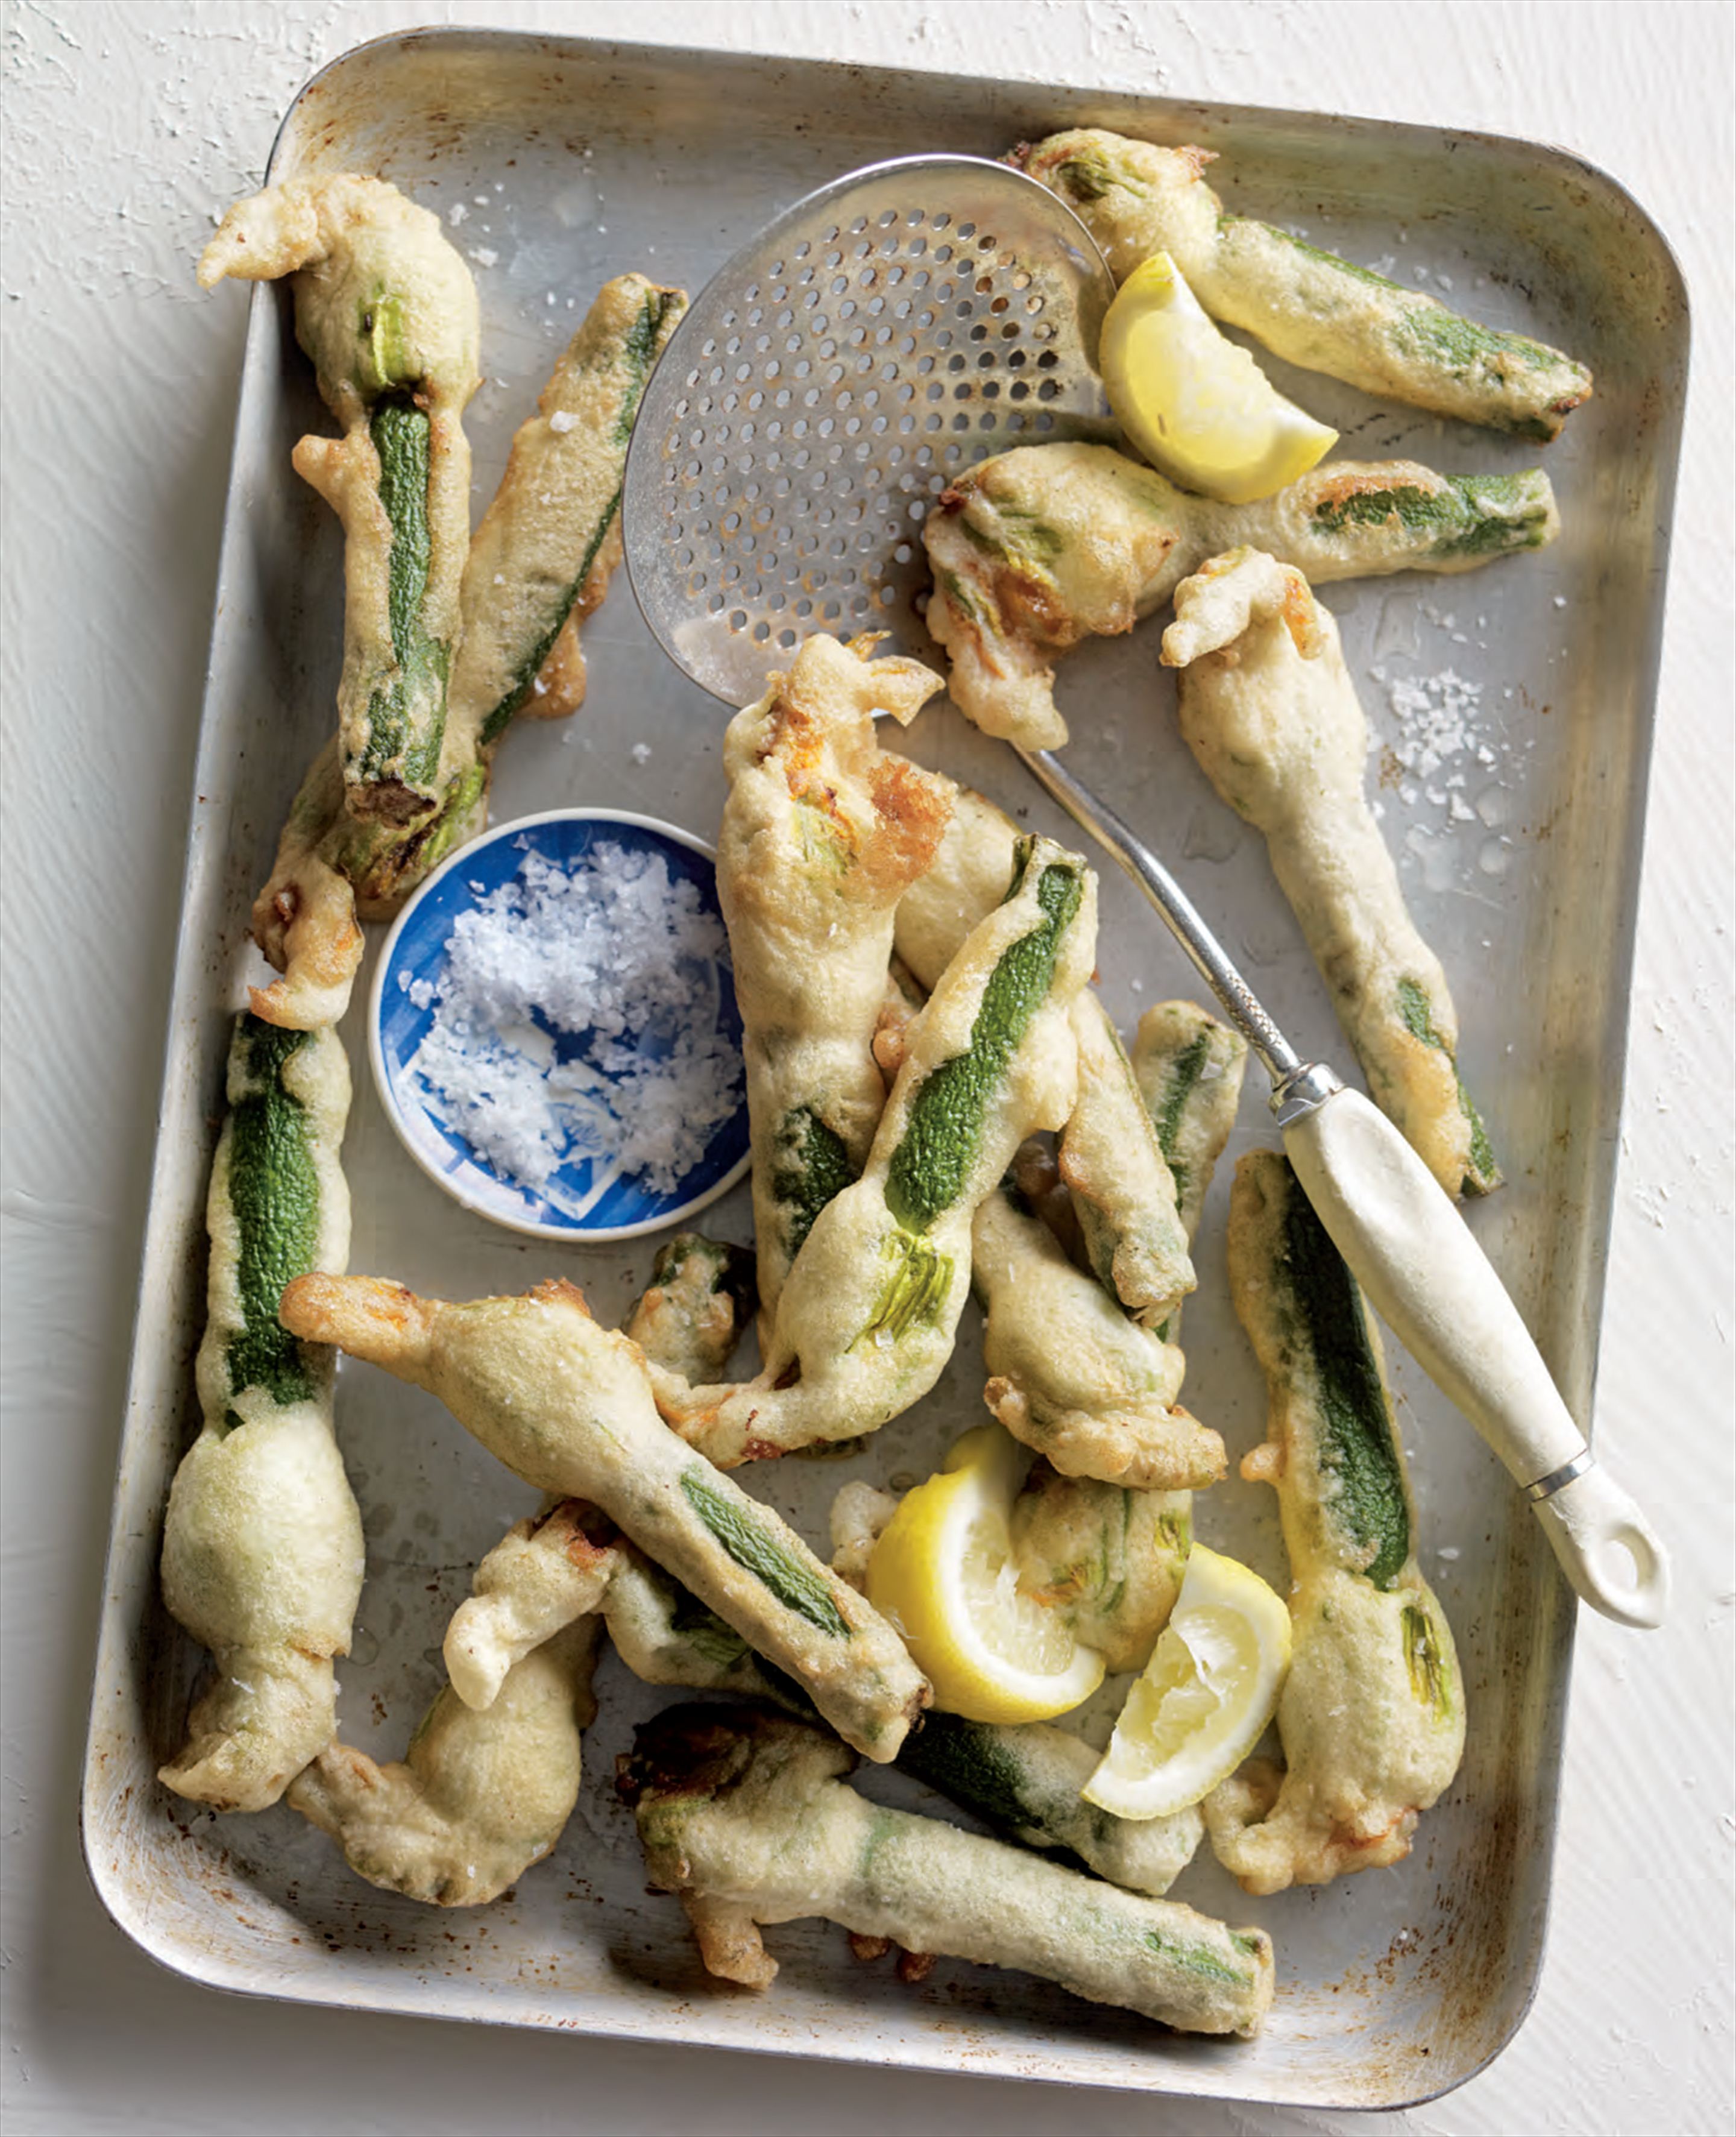 Ouzo-battered zucchini flowers stuffed with goat’s curd